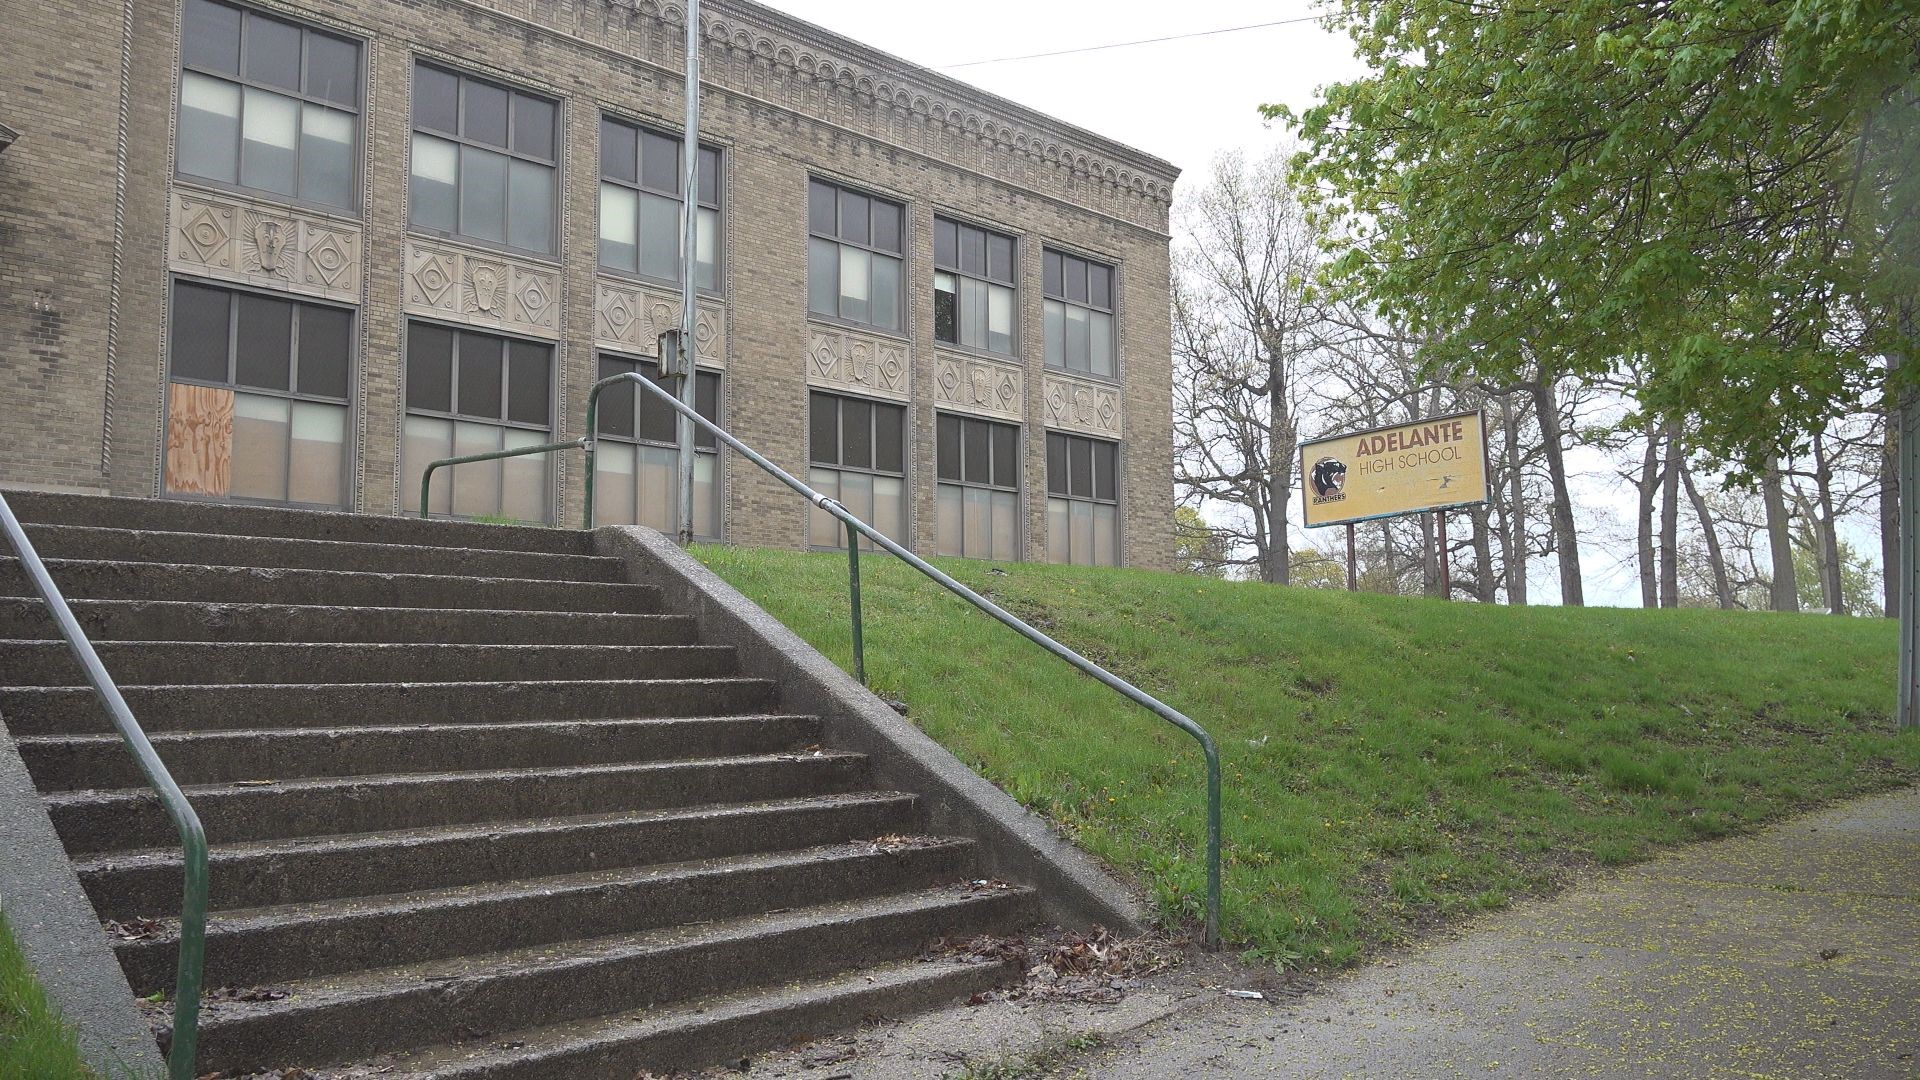 The Kensington School building, located in the Black Hills Neighborhood of Grand Rapids, may soon be leveled.